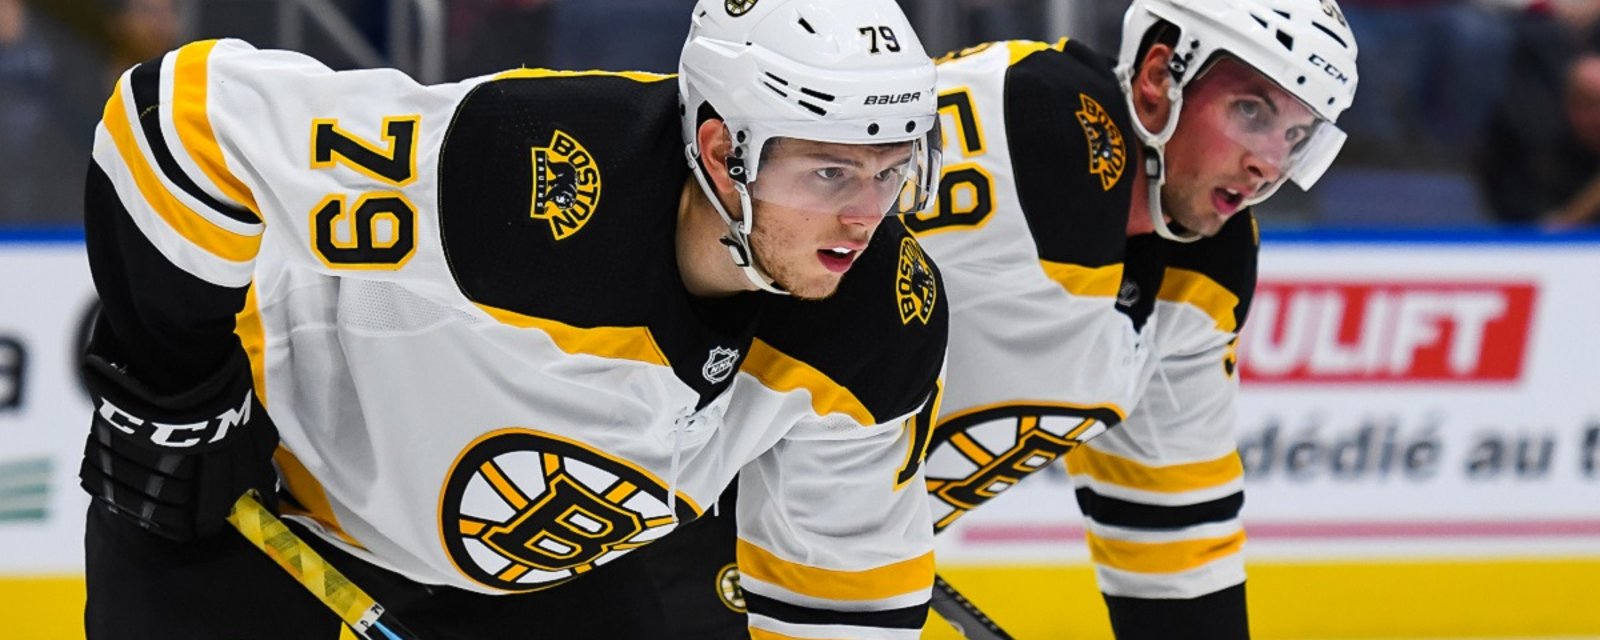 Bruins Jeremy Lauzon now facing a suspension and fans in Boston are outraged.